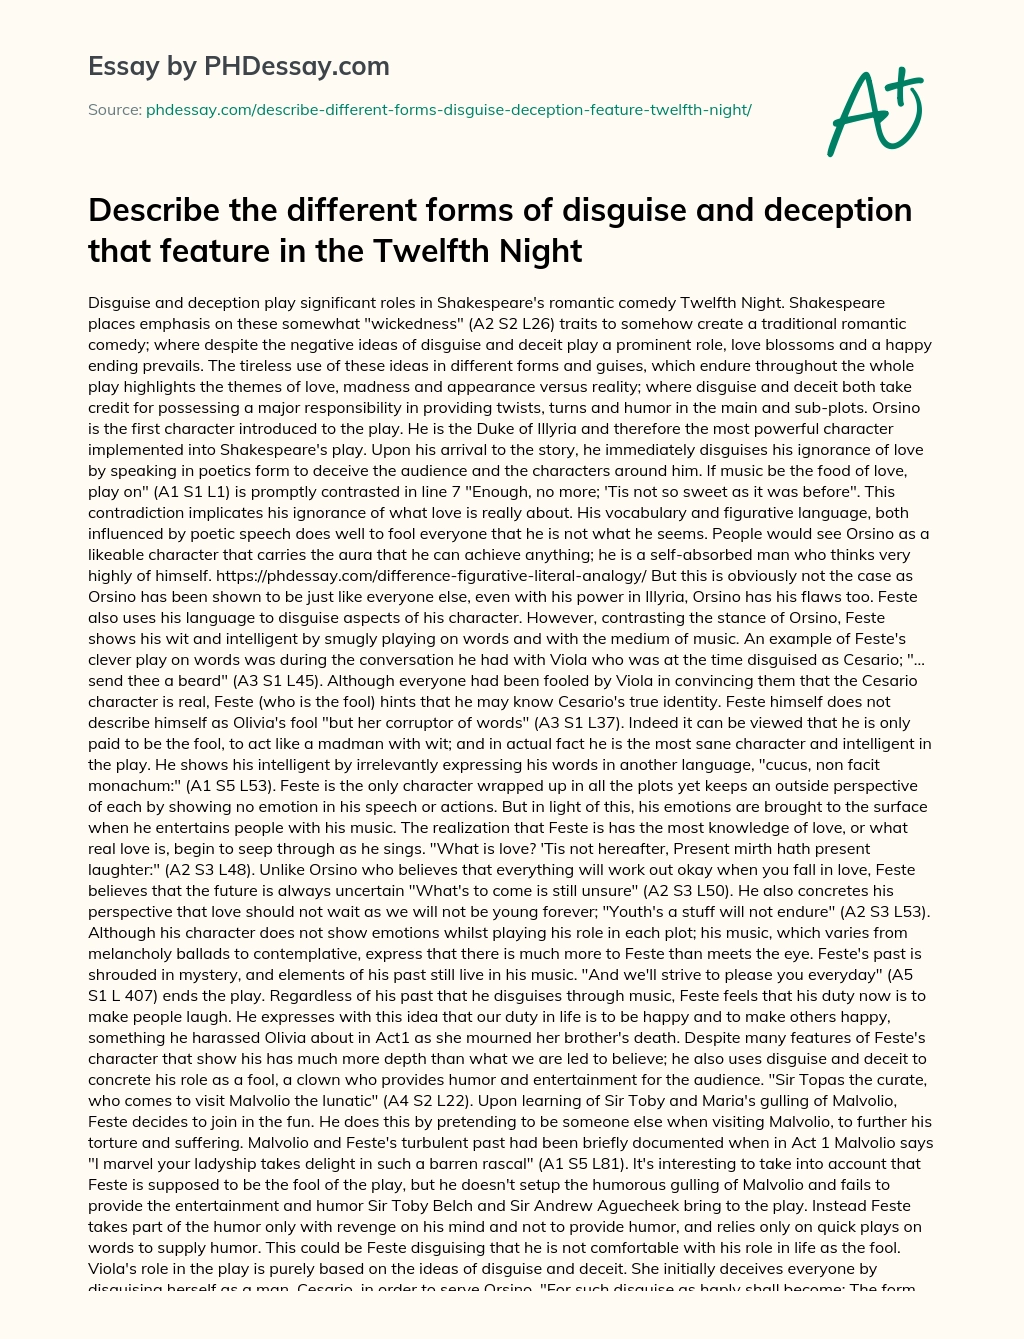 Describe the different forms of disguise and deception that feature in the Twelfth Night essay